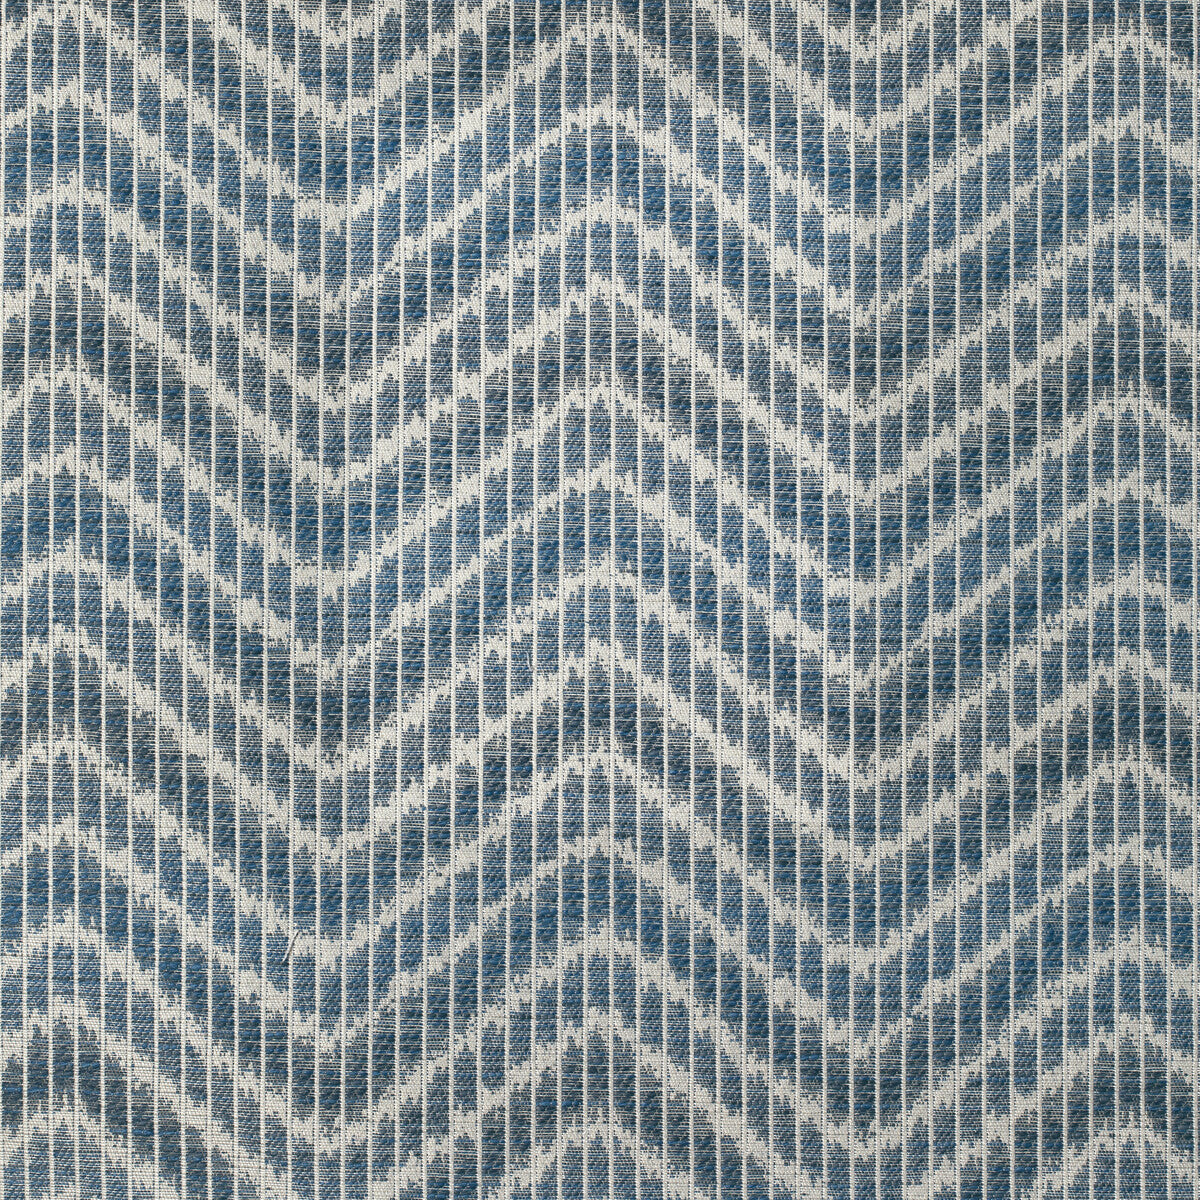 Chausey Woven fabric in navy color - pattern 8020106.50.0 - by Brunschwig &amp; Fils in the Granville Weaves collection